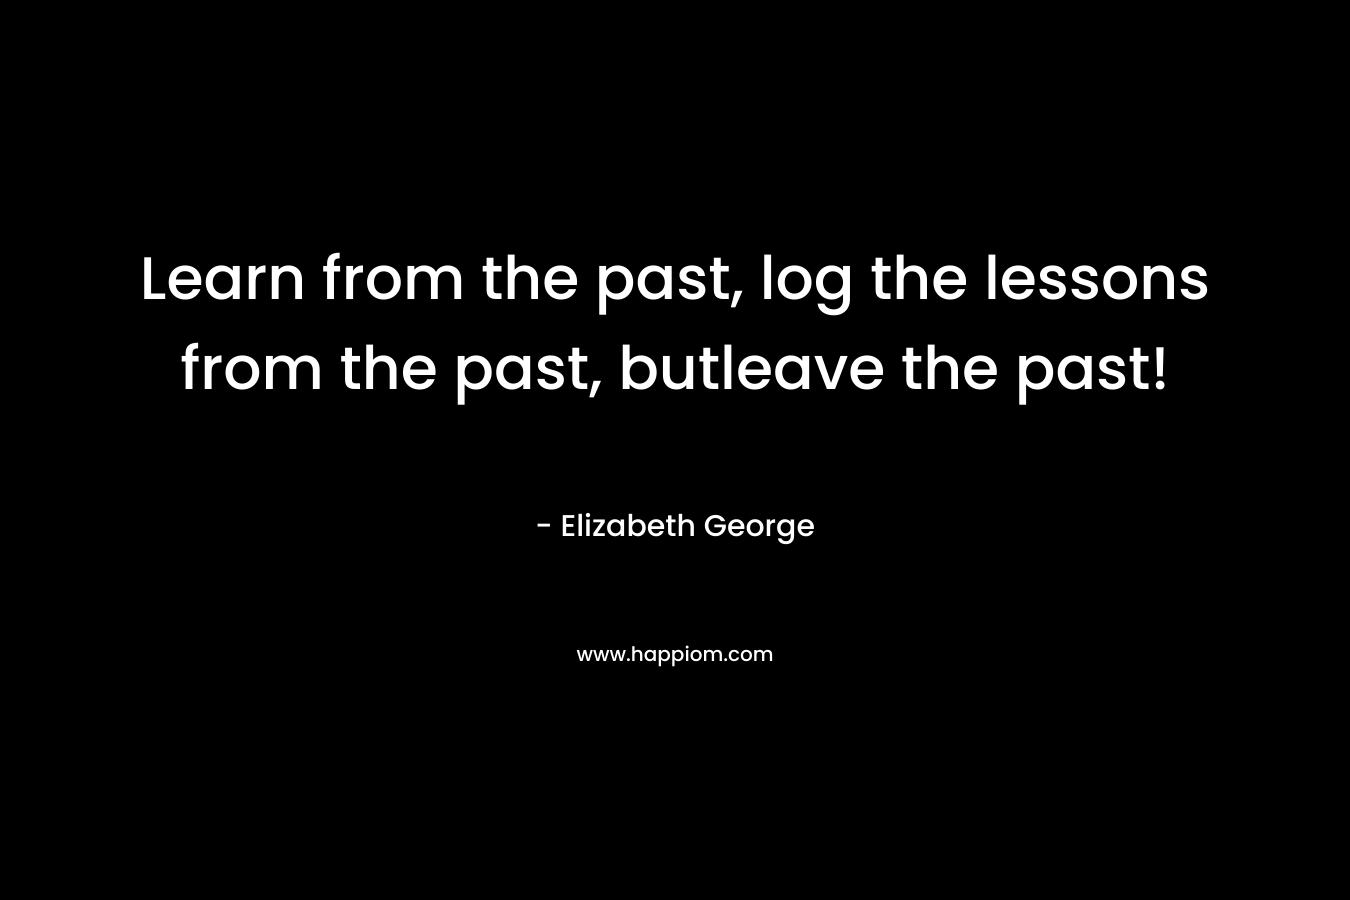 Learn from the past, log the lessons from the past, butleave the past!